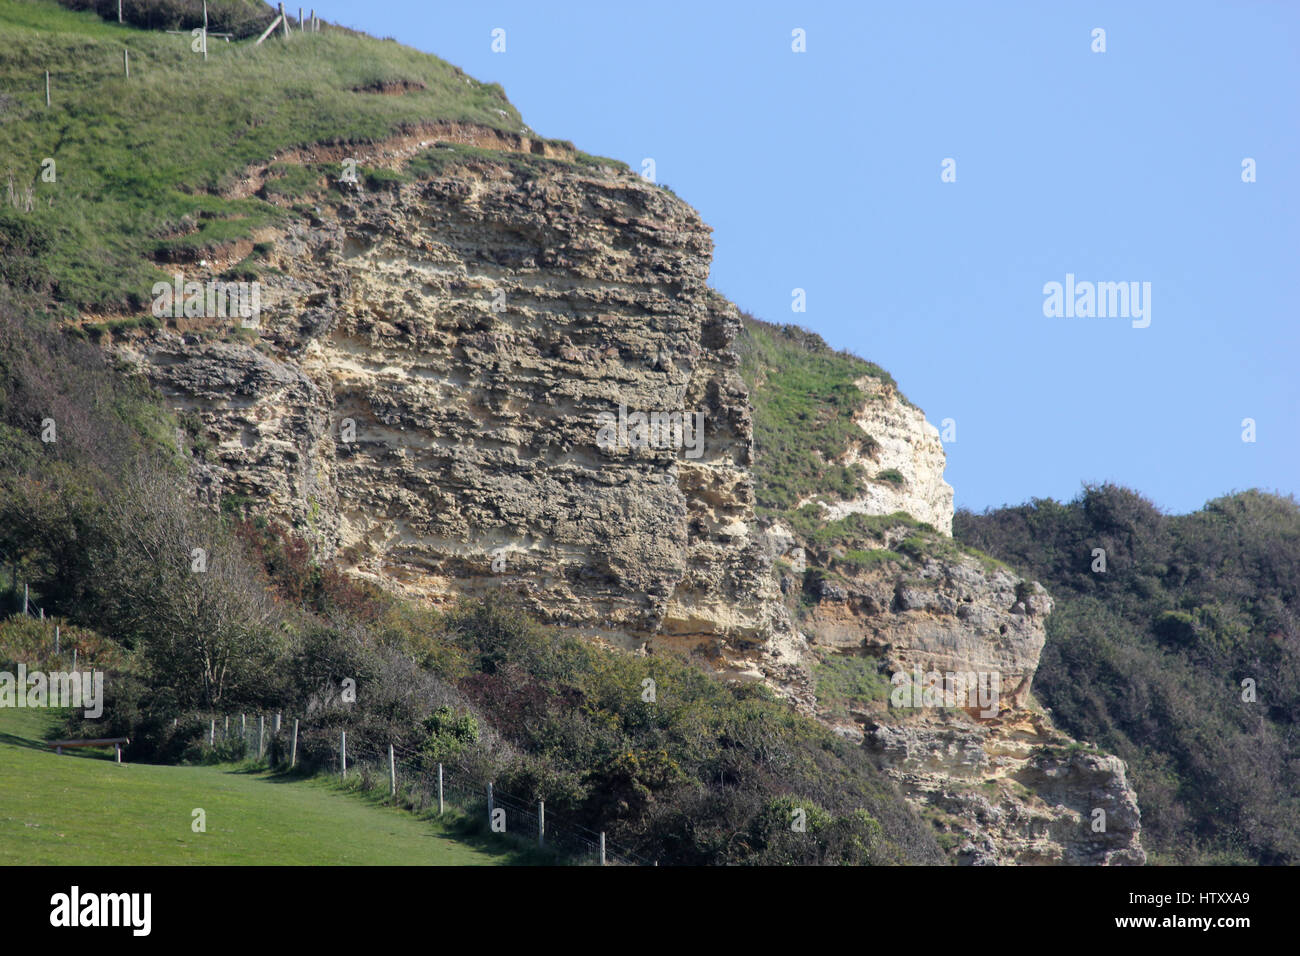 The upper greensand cliffs at Branscombe Mouth, Devon, showing part of the South West coast path national trail, on a sunny day with blue sky Stock Photo